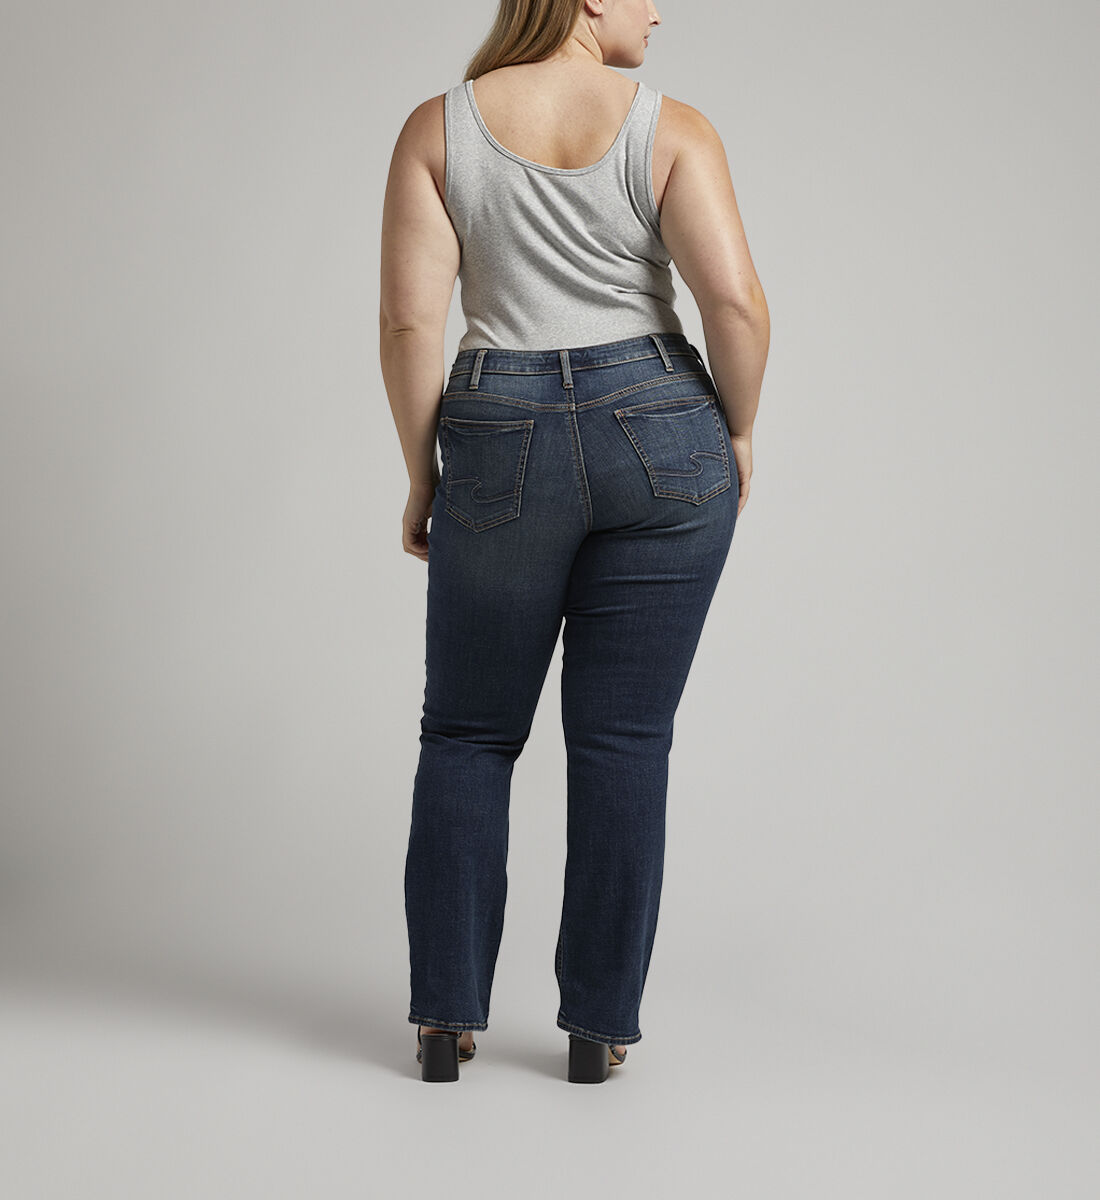 These Are the Best Pants for a Curvy Figure